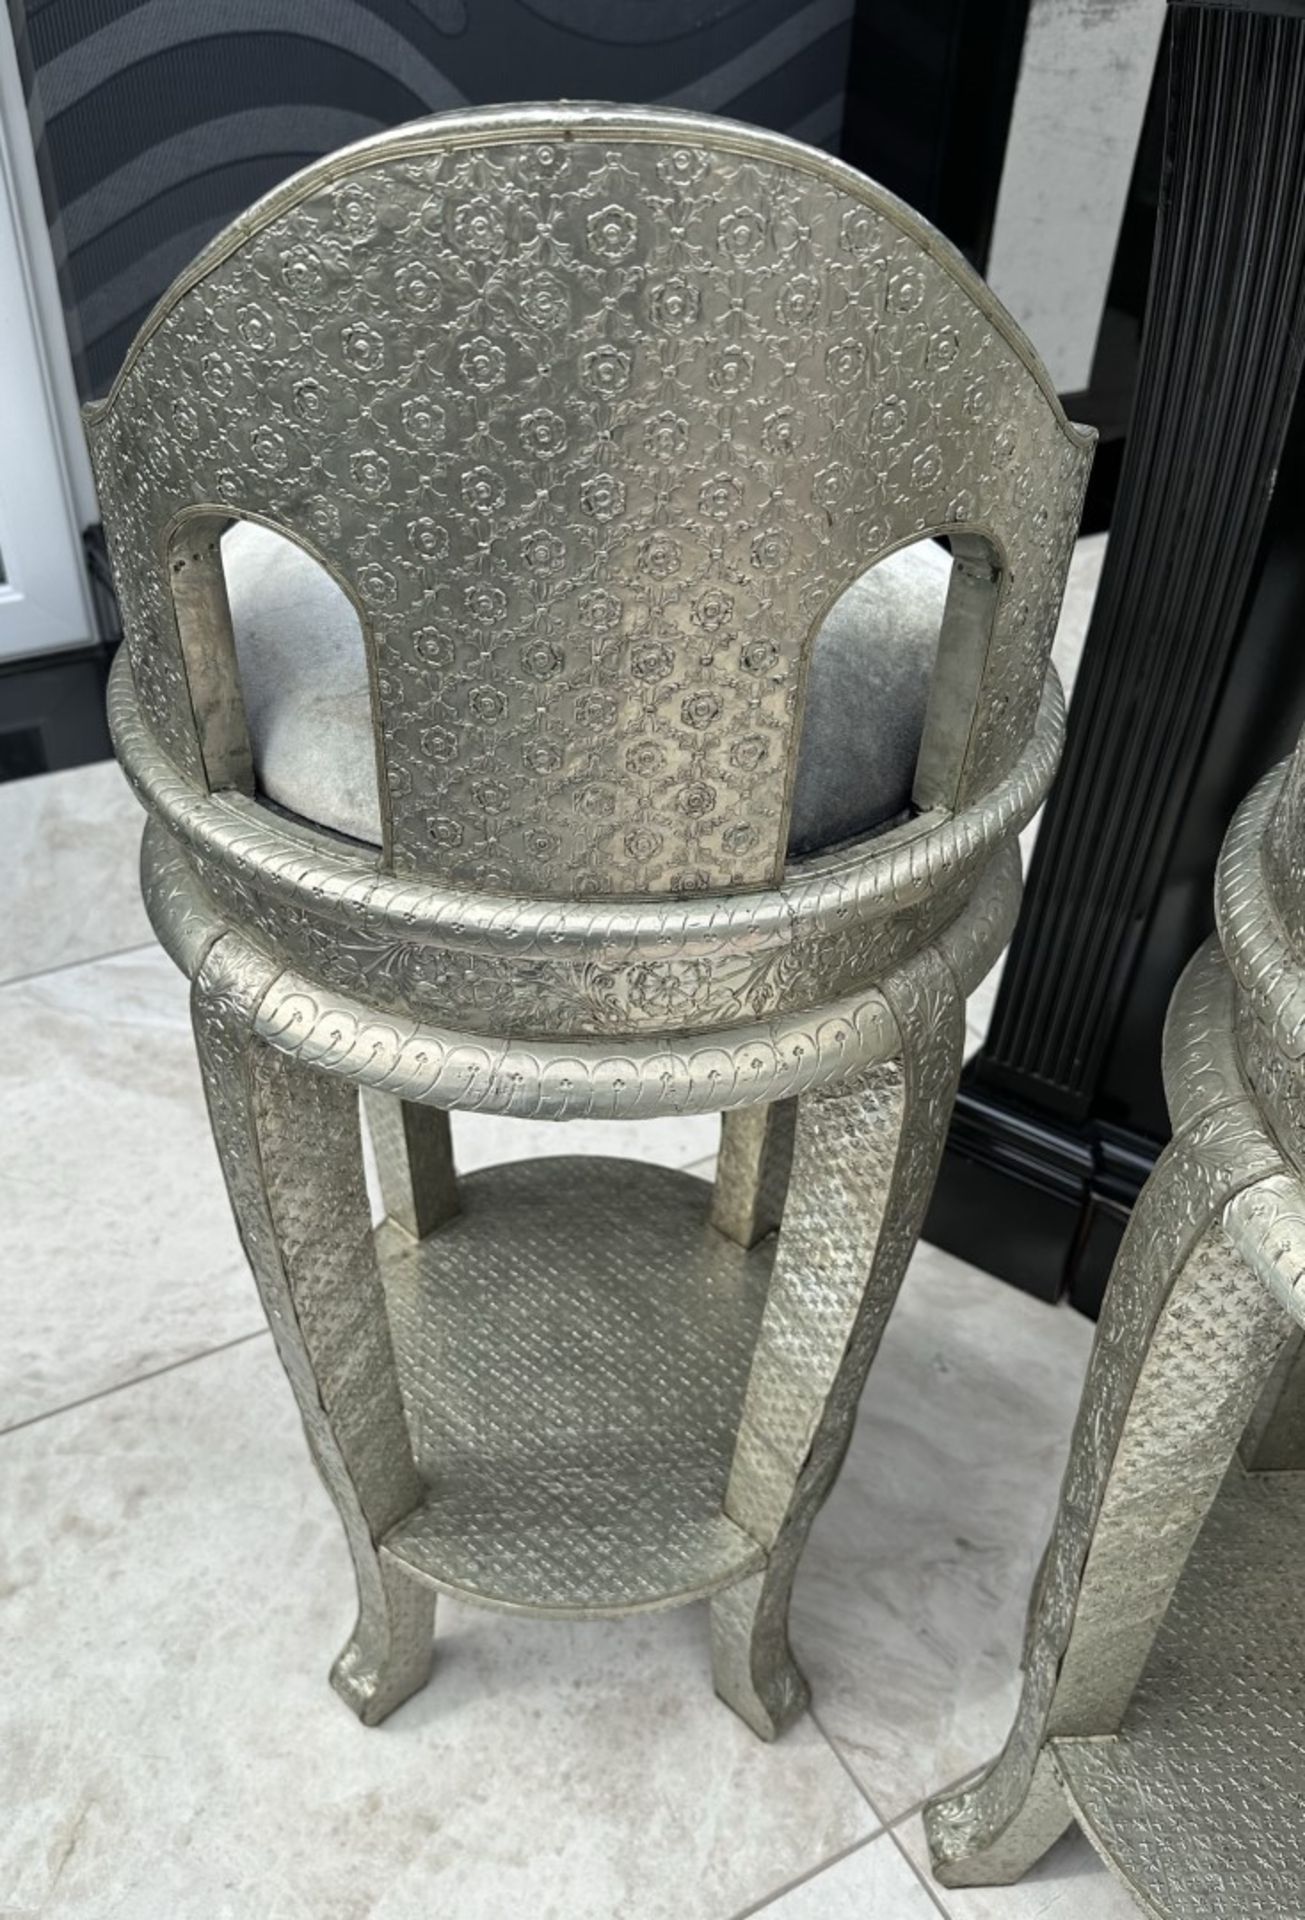 6 x Ornate Silver Tone Bar Stools With Grey Velvet Seat Pads - Image 4 of 16